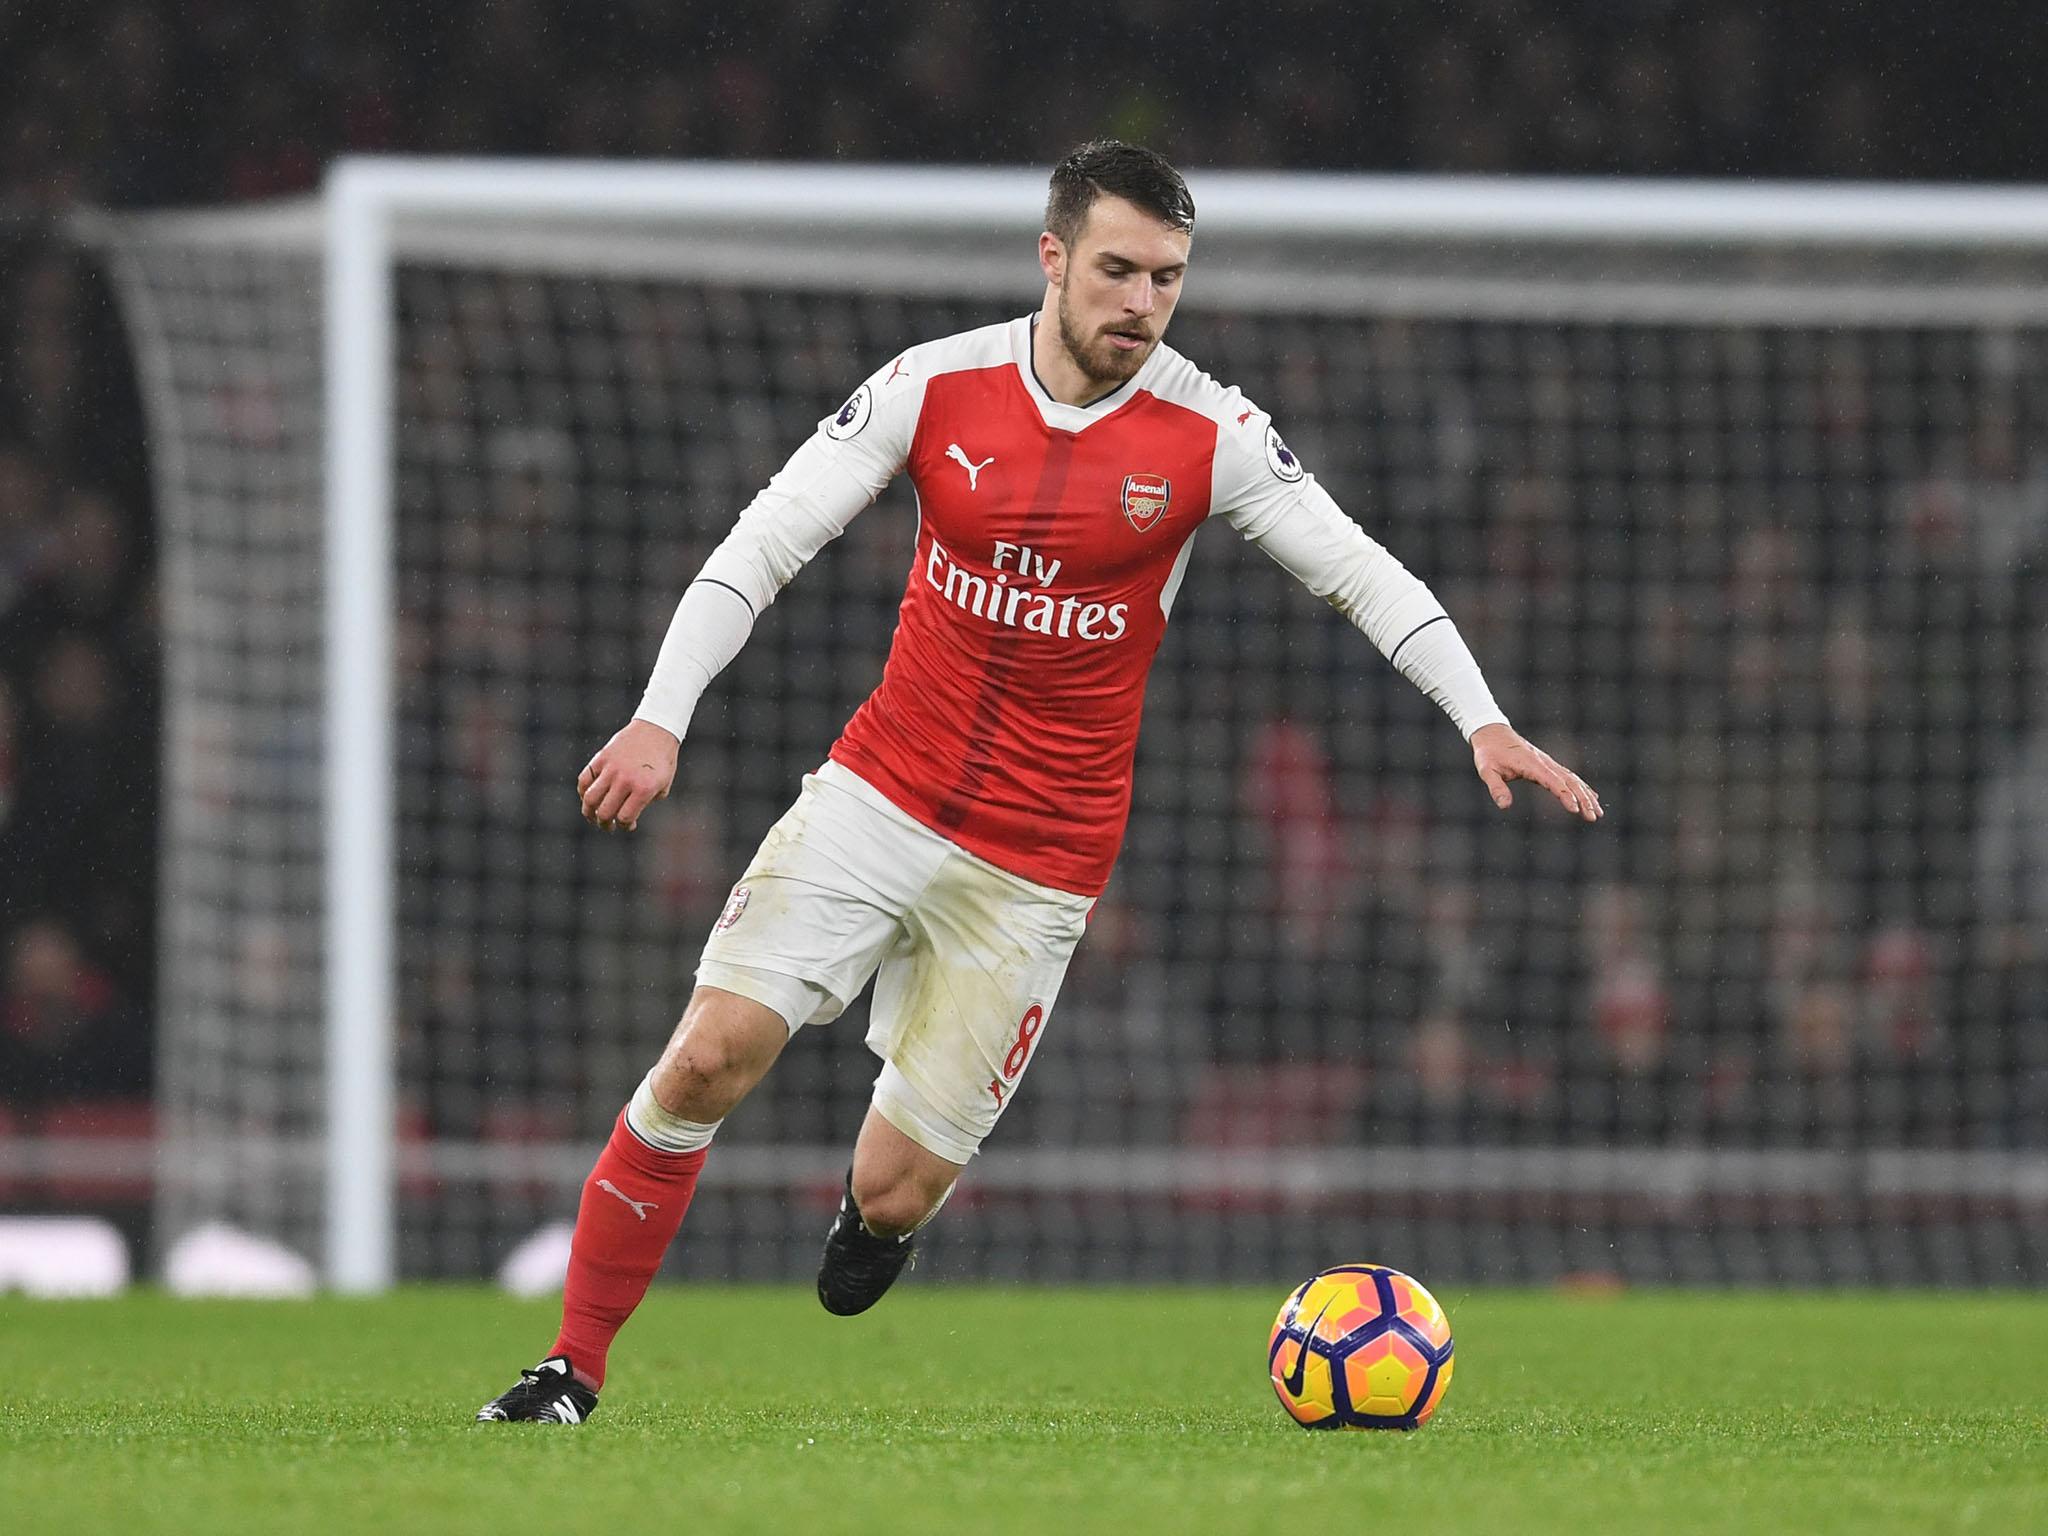 Ramsey turned his back on Watford's first goal